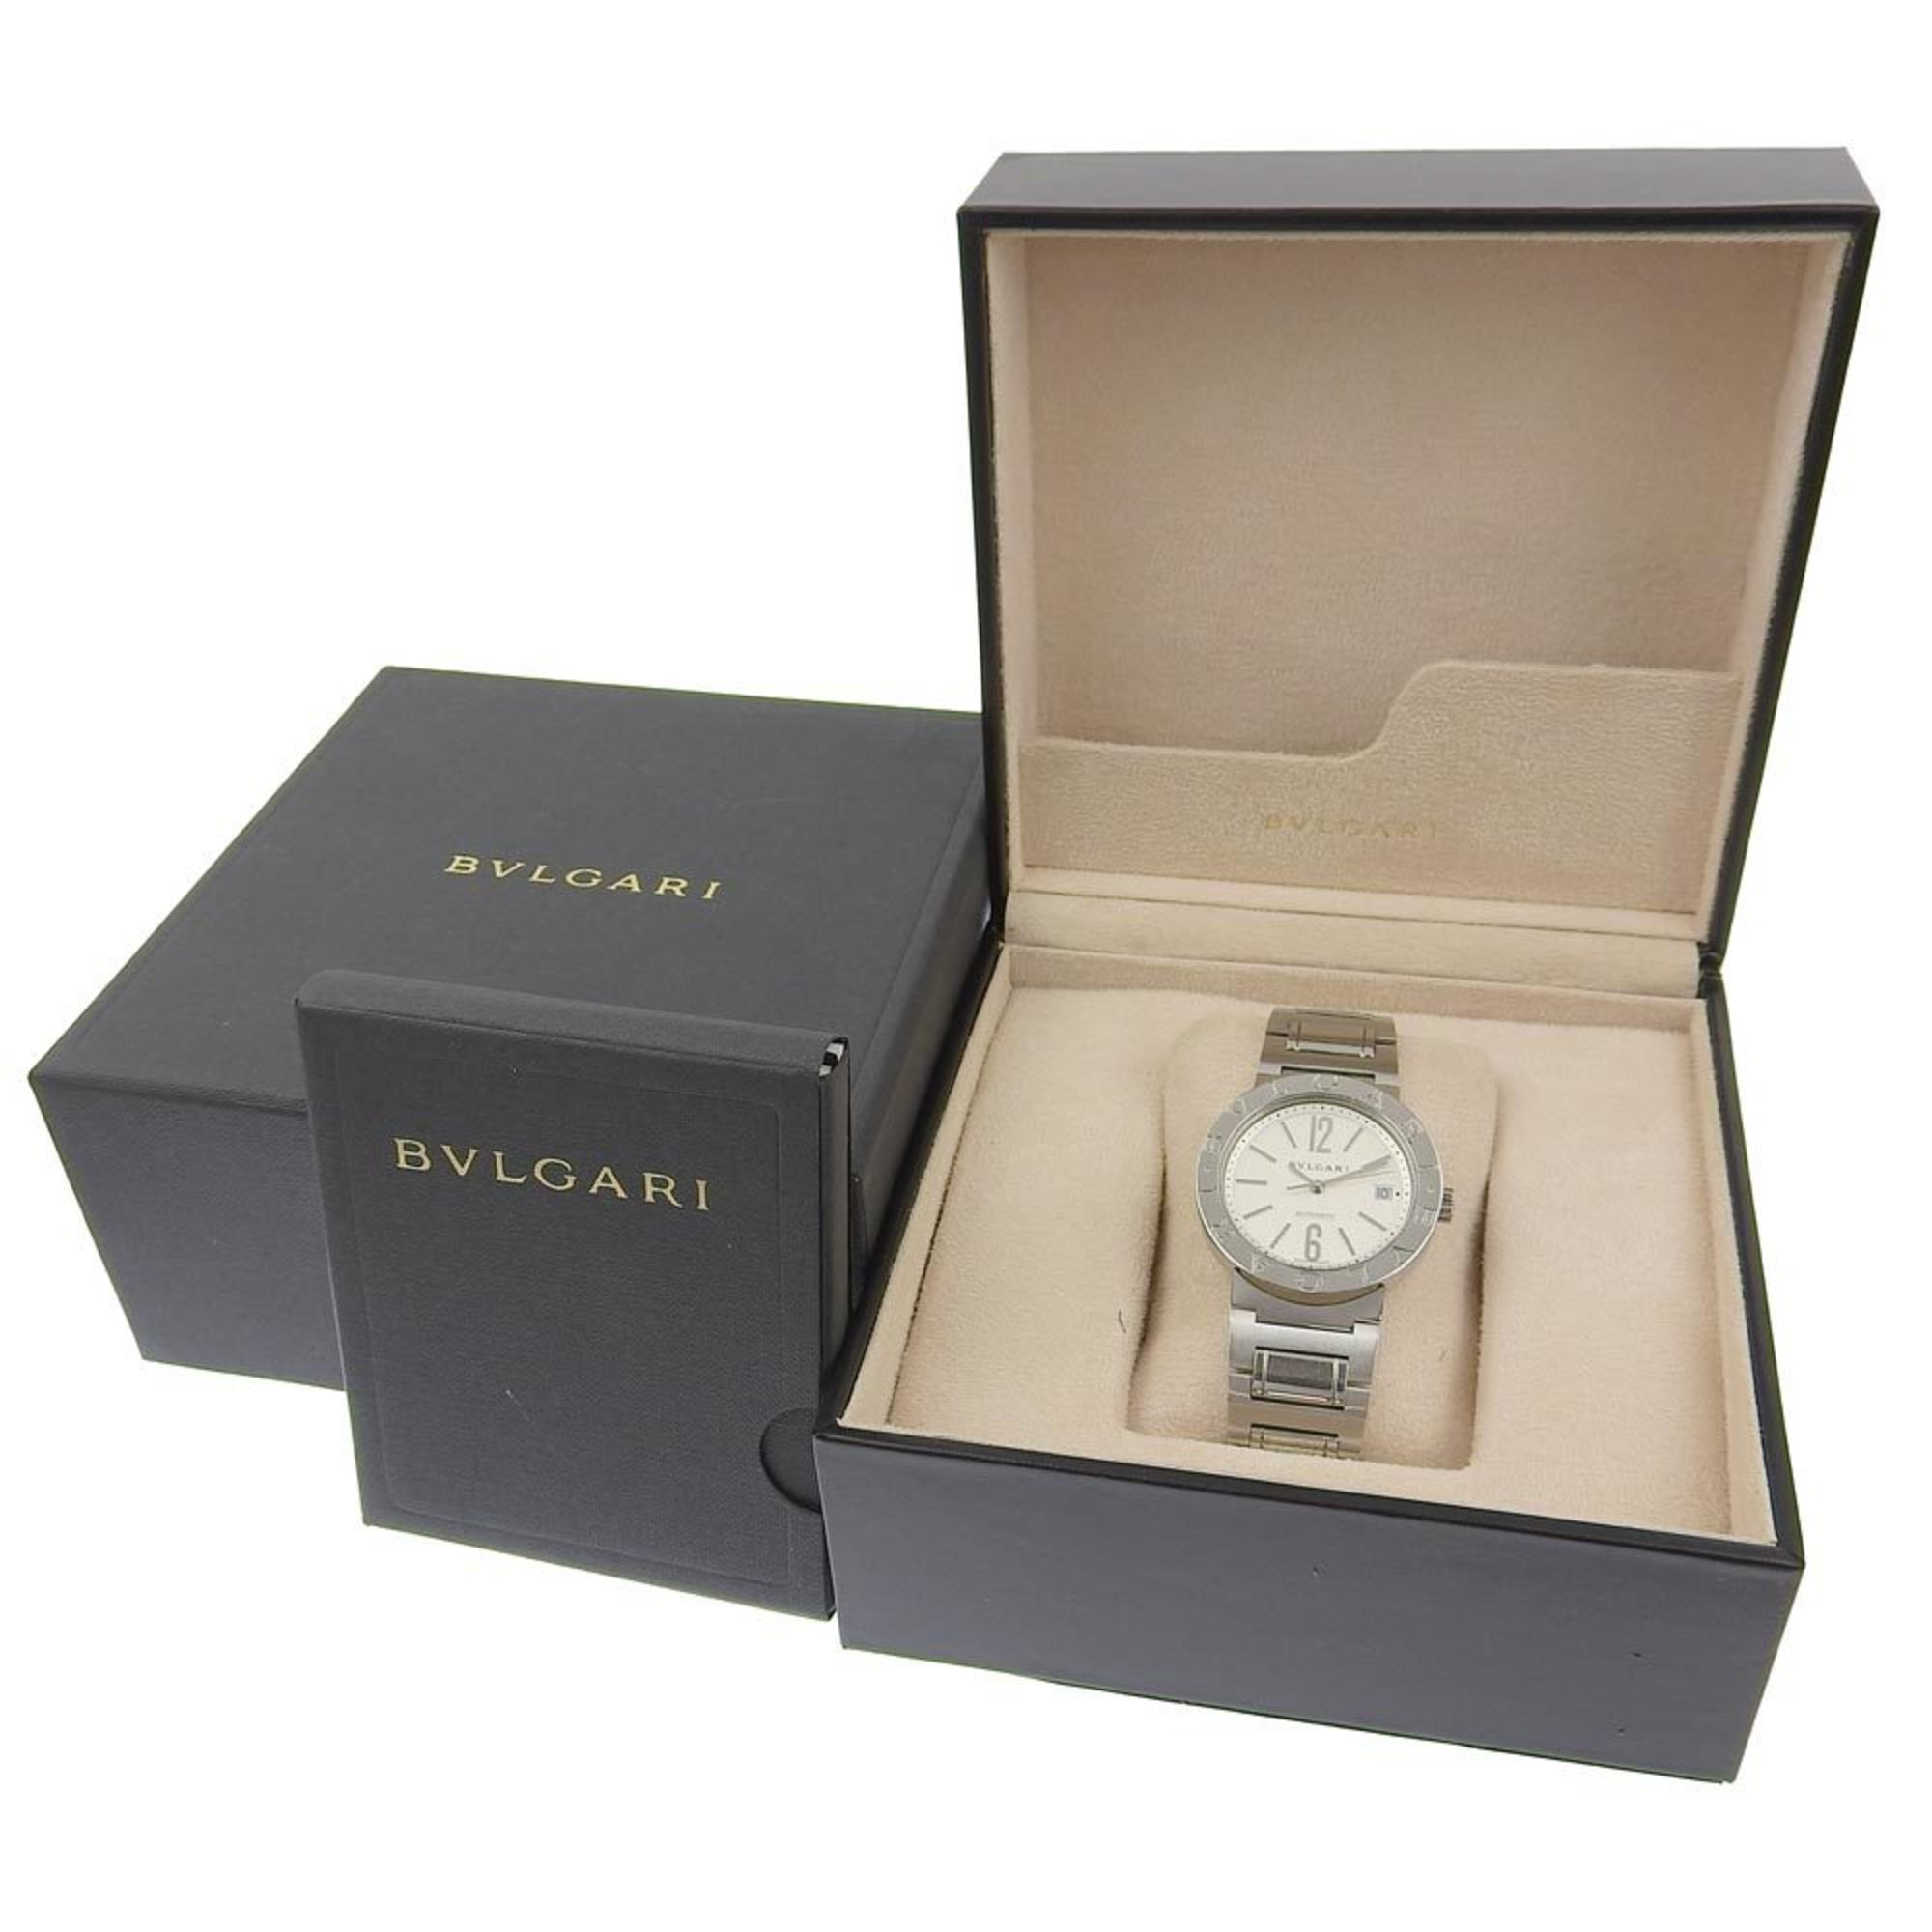 Bulgari BVLGARI Watch BB38SS AUTO Stainless Steel Swiss Made Silver Automatic White Dial Men's